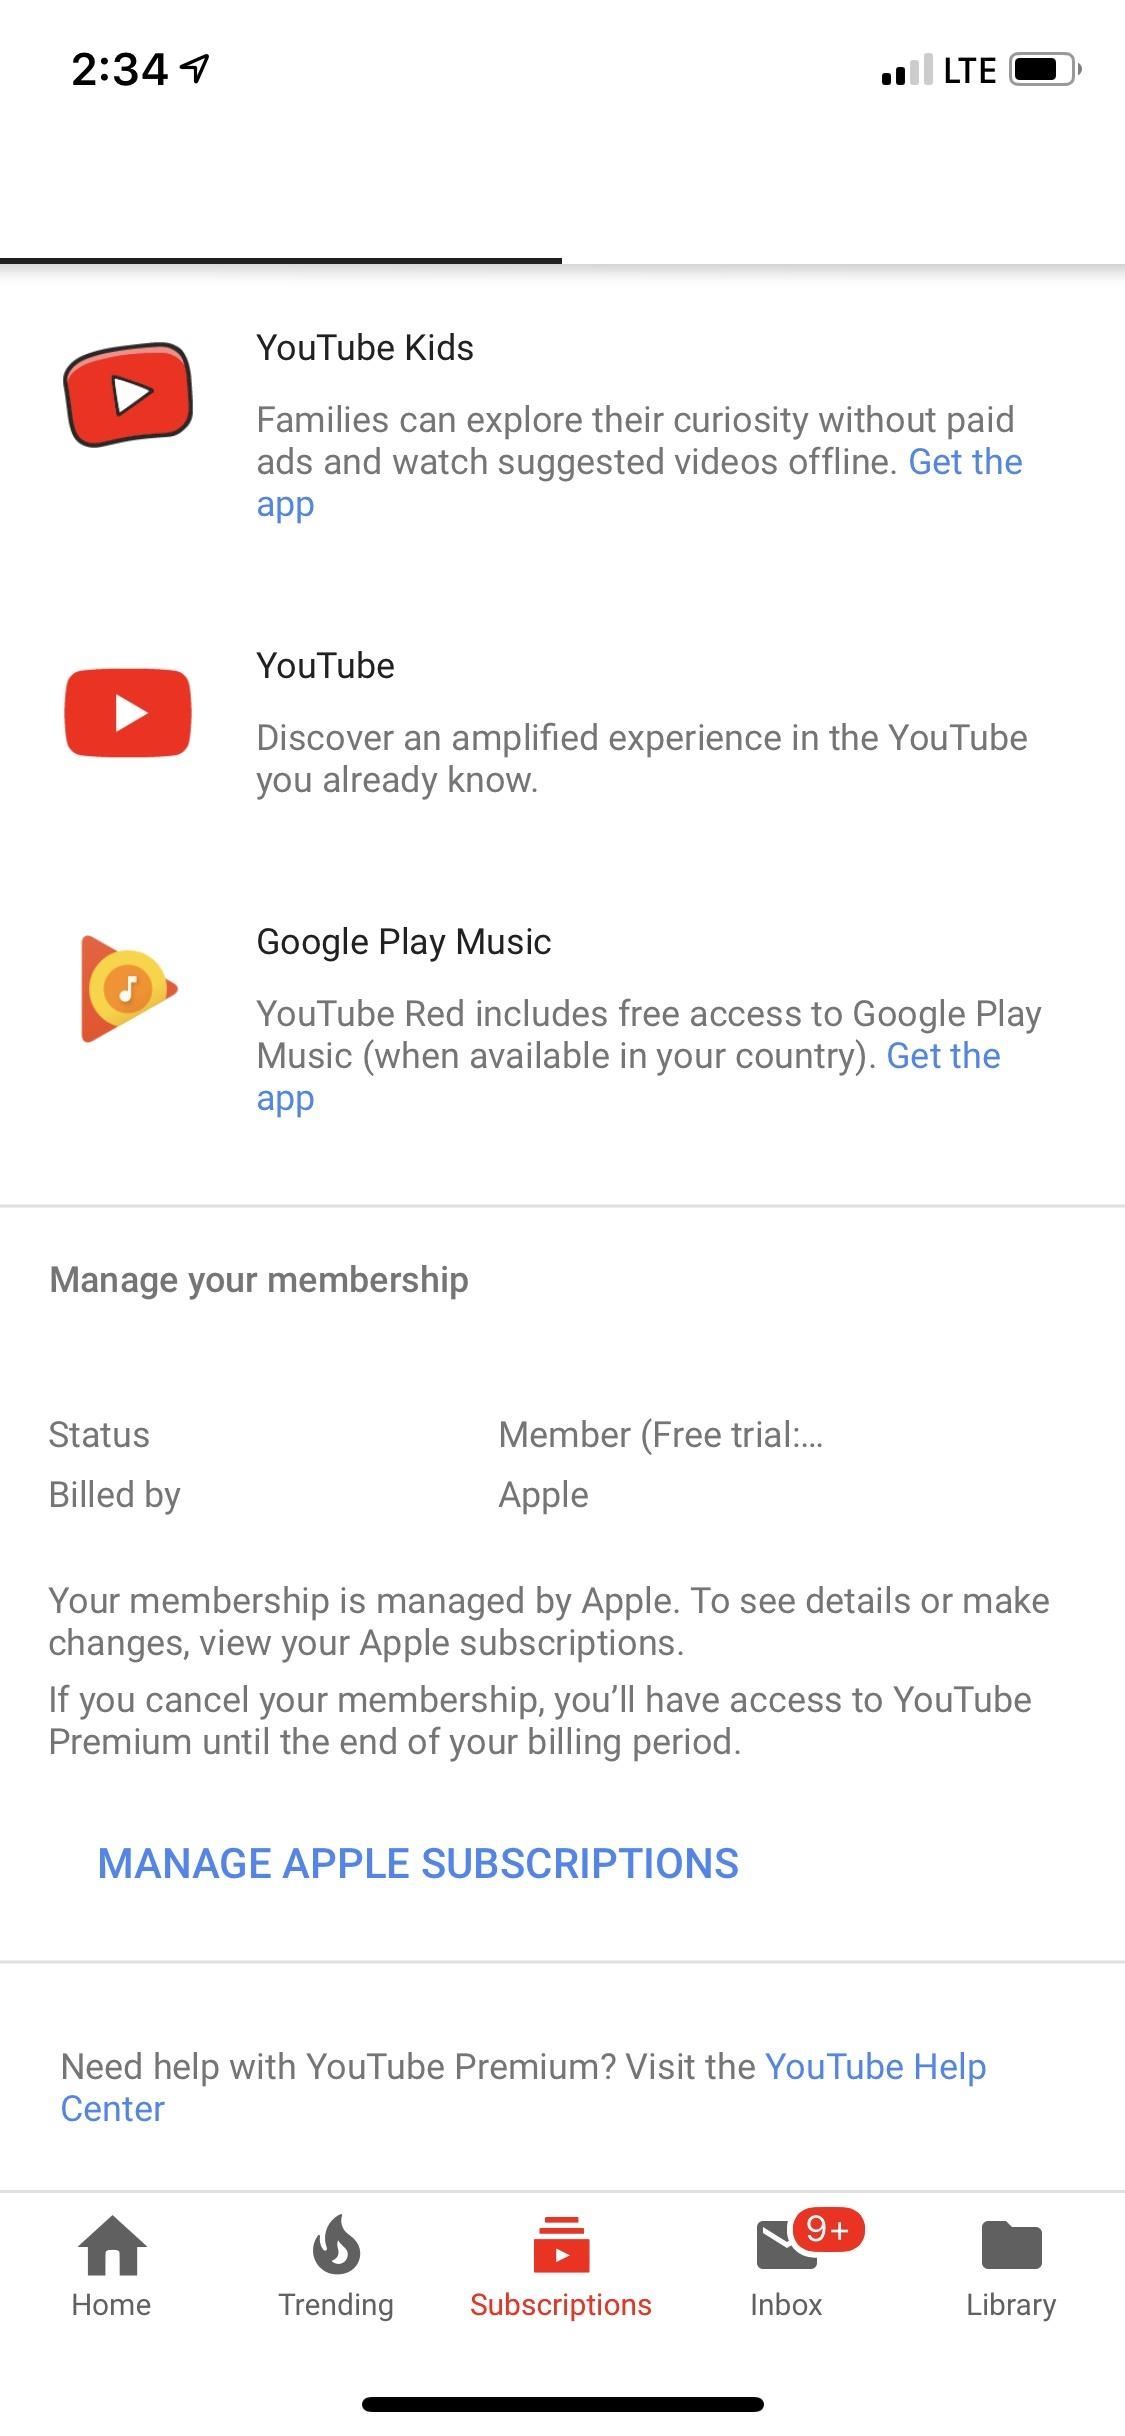 How to Save YouTube Videos Directly to Your iPhone's Camera Roll